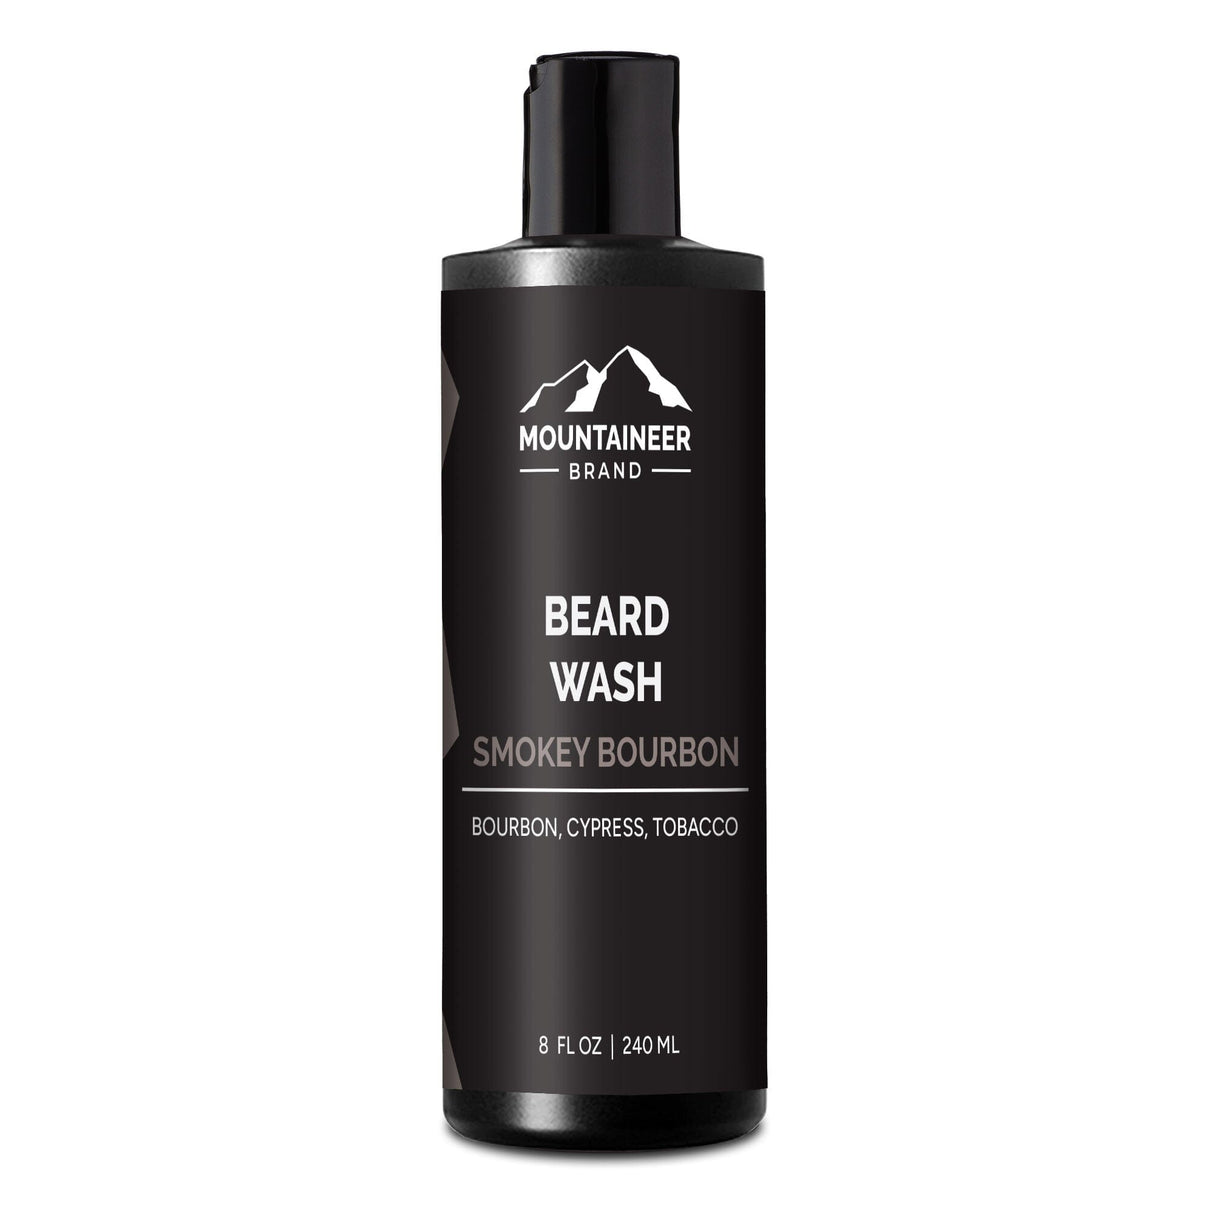 A bottle of Smokey Bourbon Beard Wash, containing natural ingredients, on a white background.